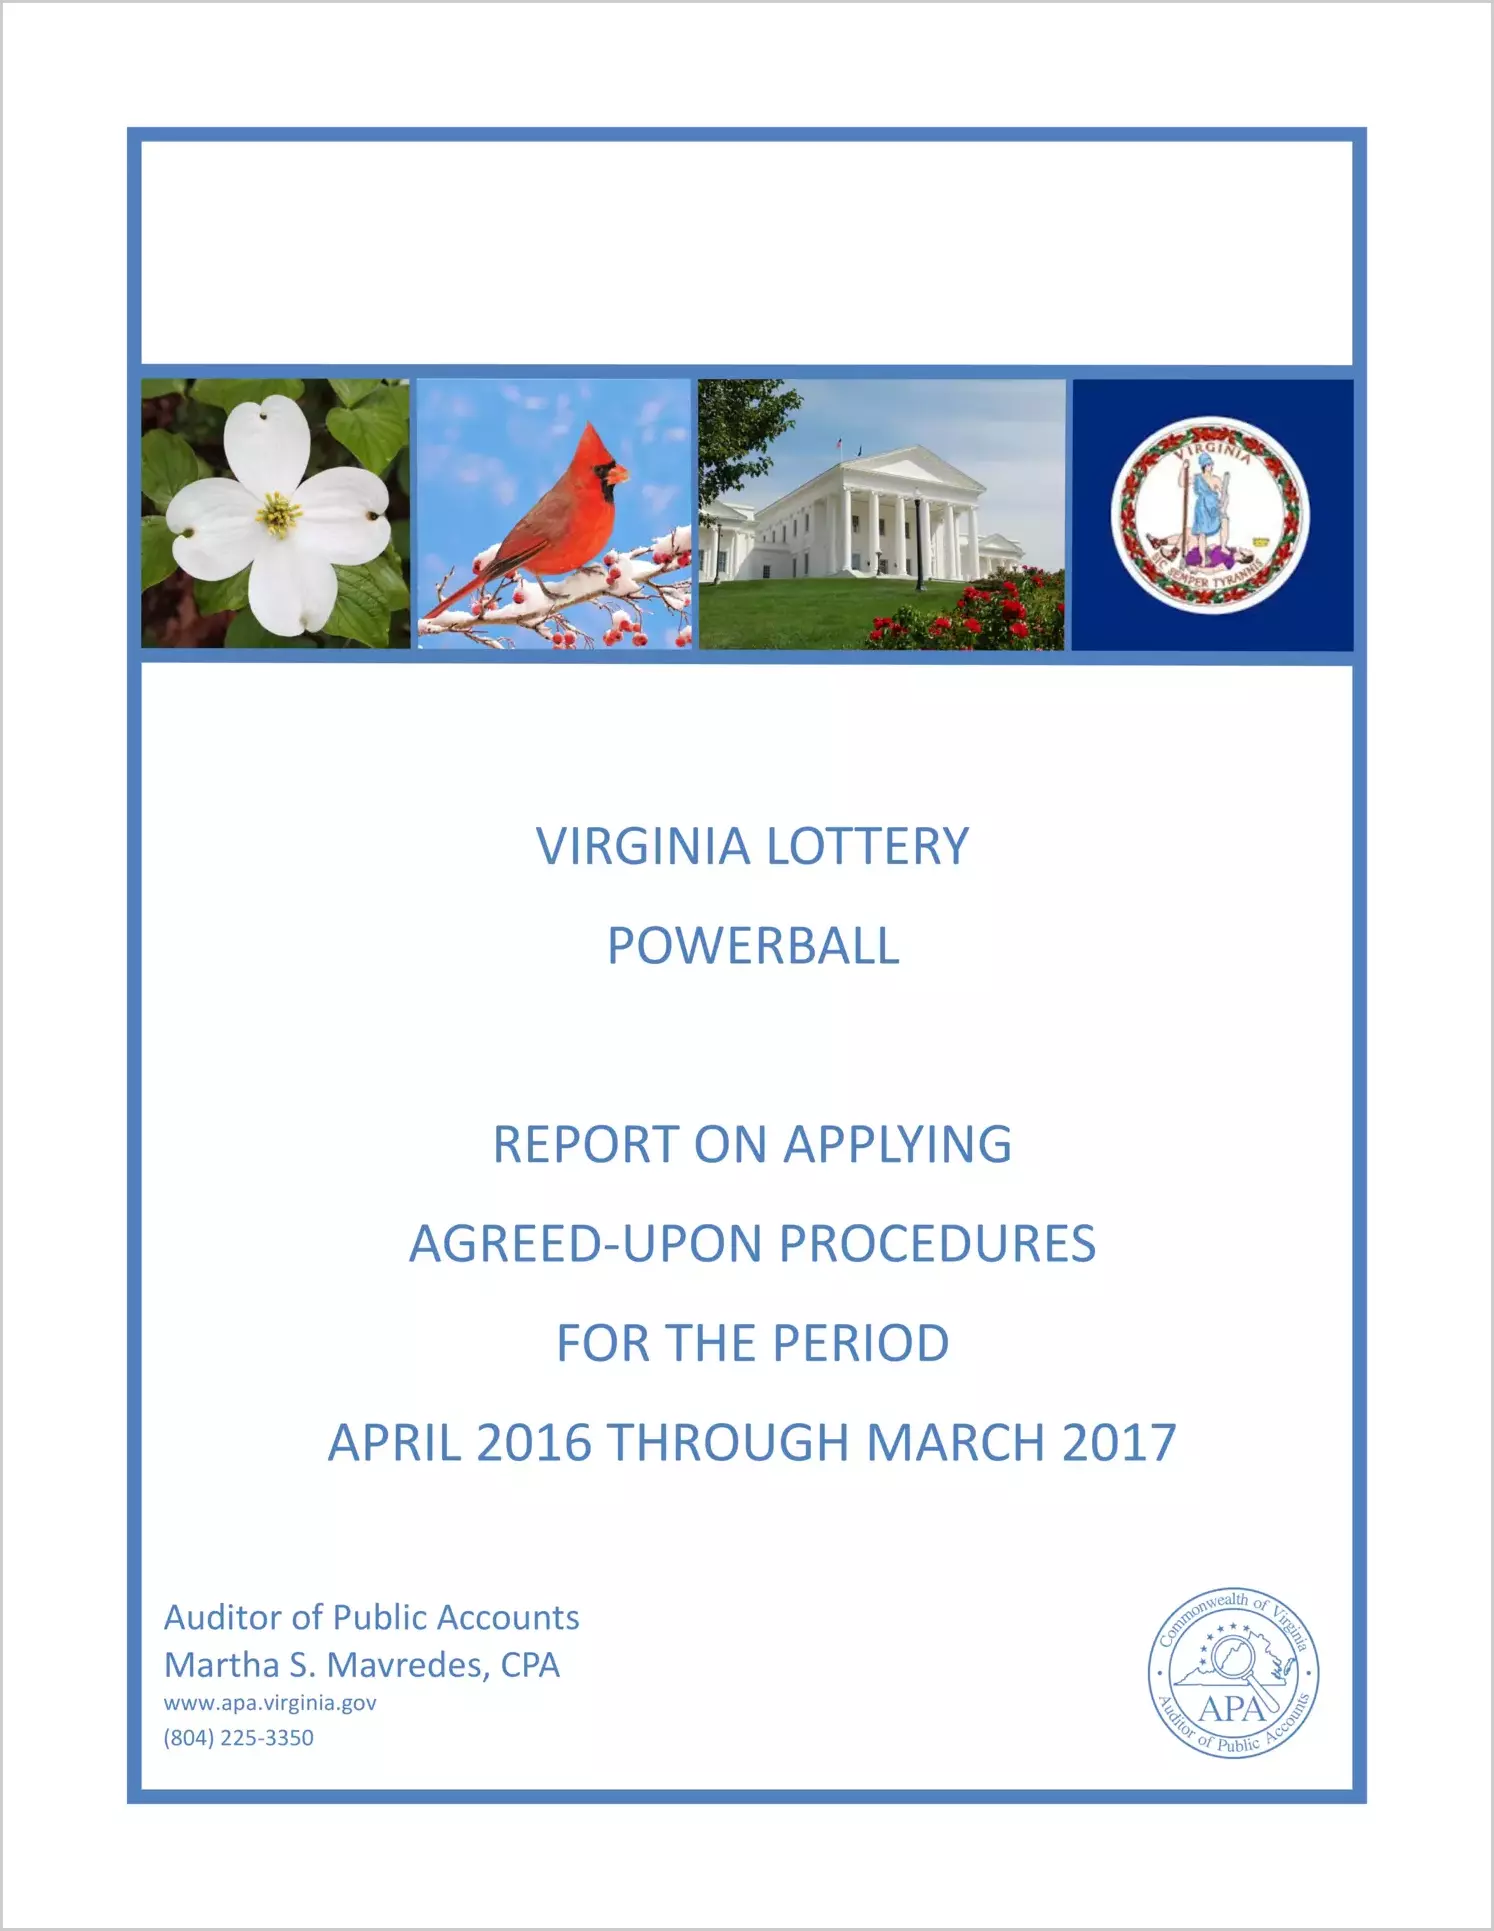 VA Lottery Powerball report on Applying Agreed-Upon Procedures for the period April 2016 through March 2017